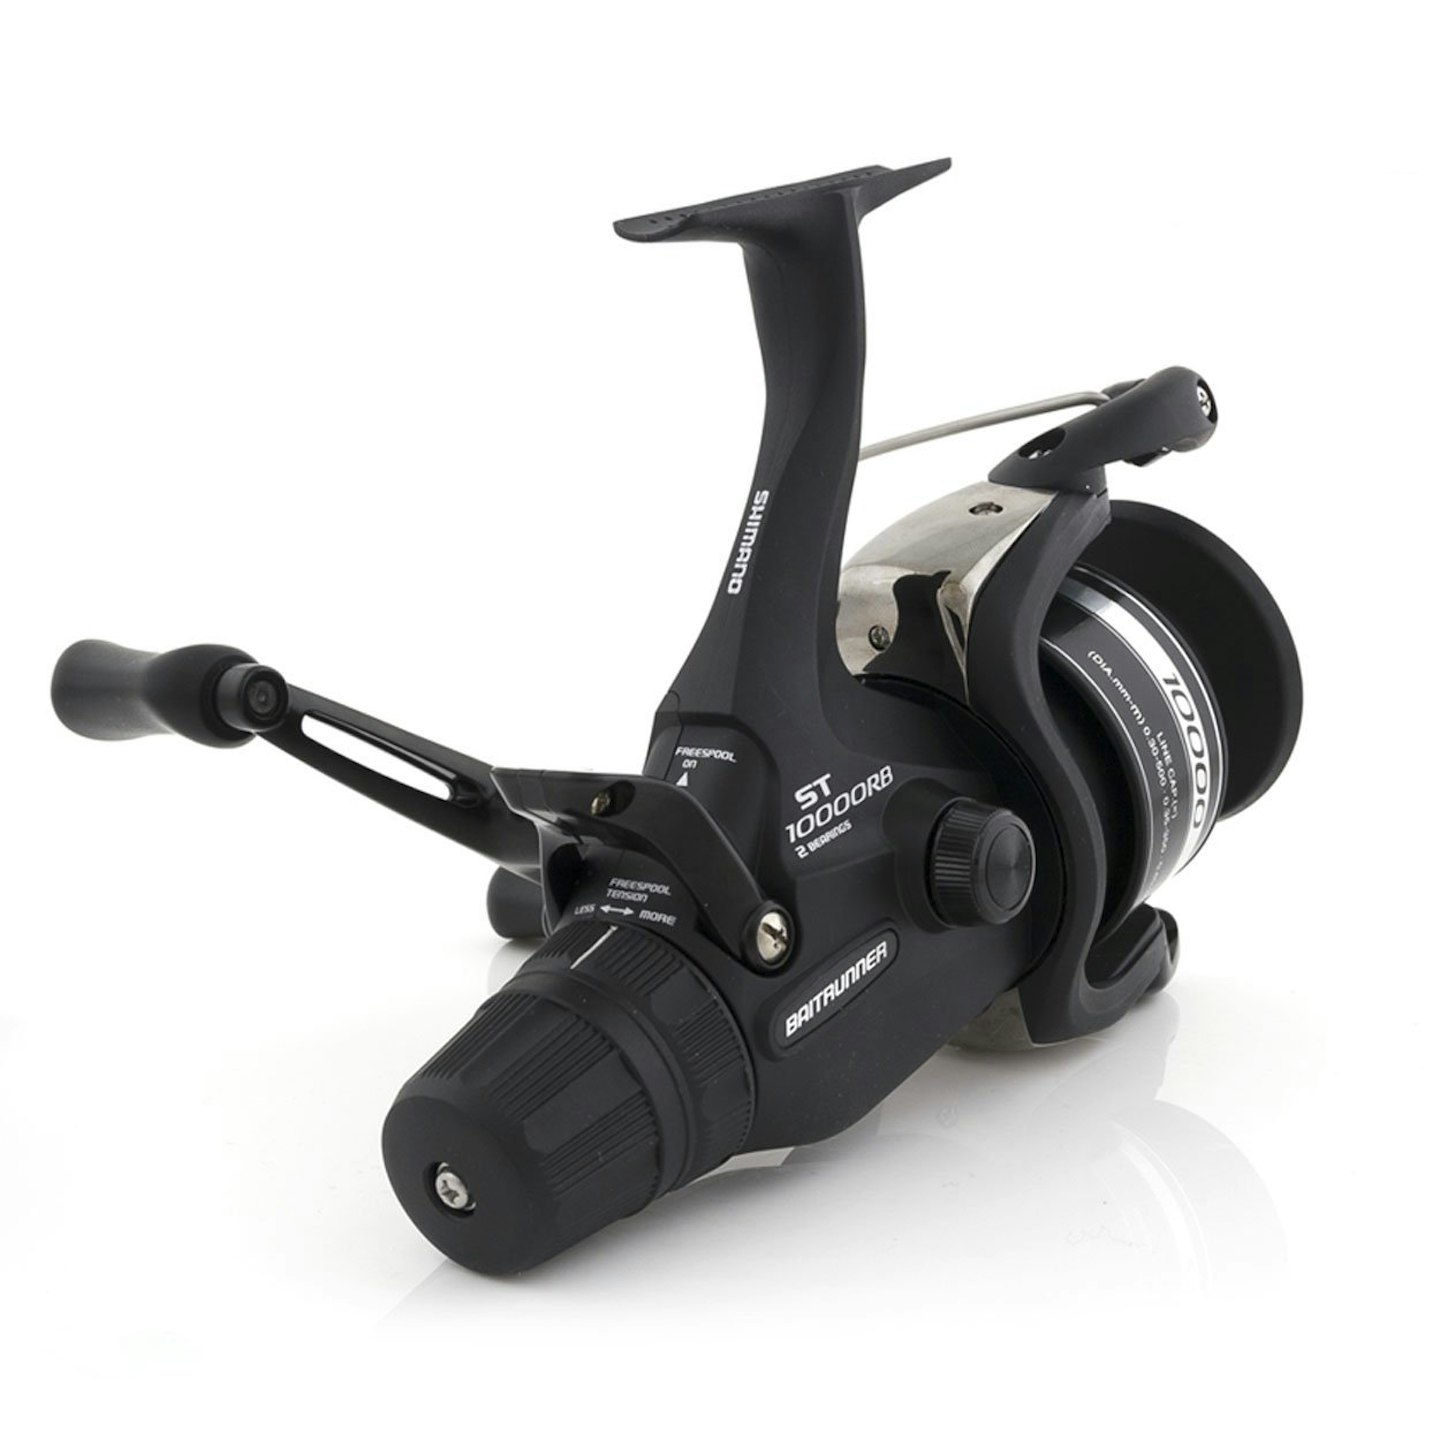 4 of the best value carp reels to buy now!